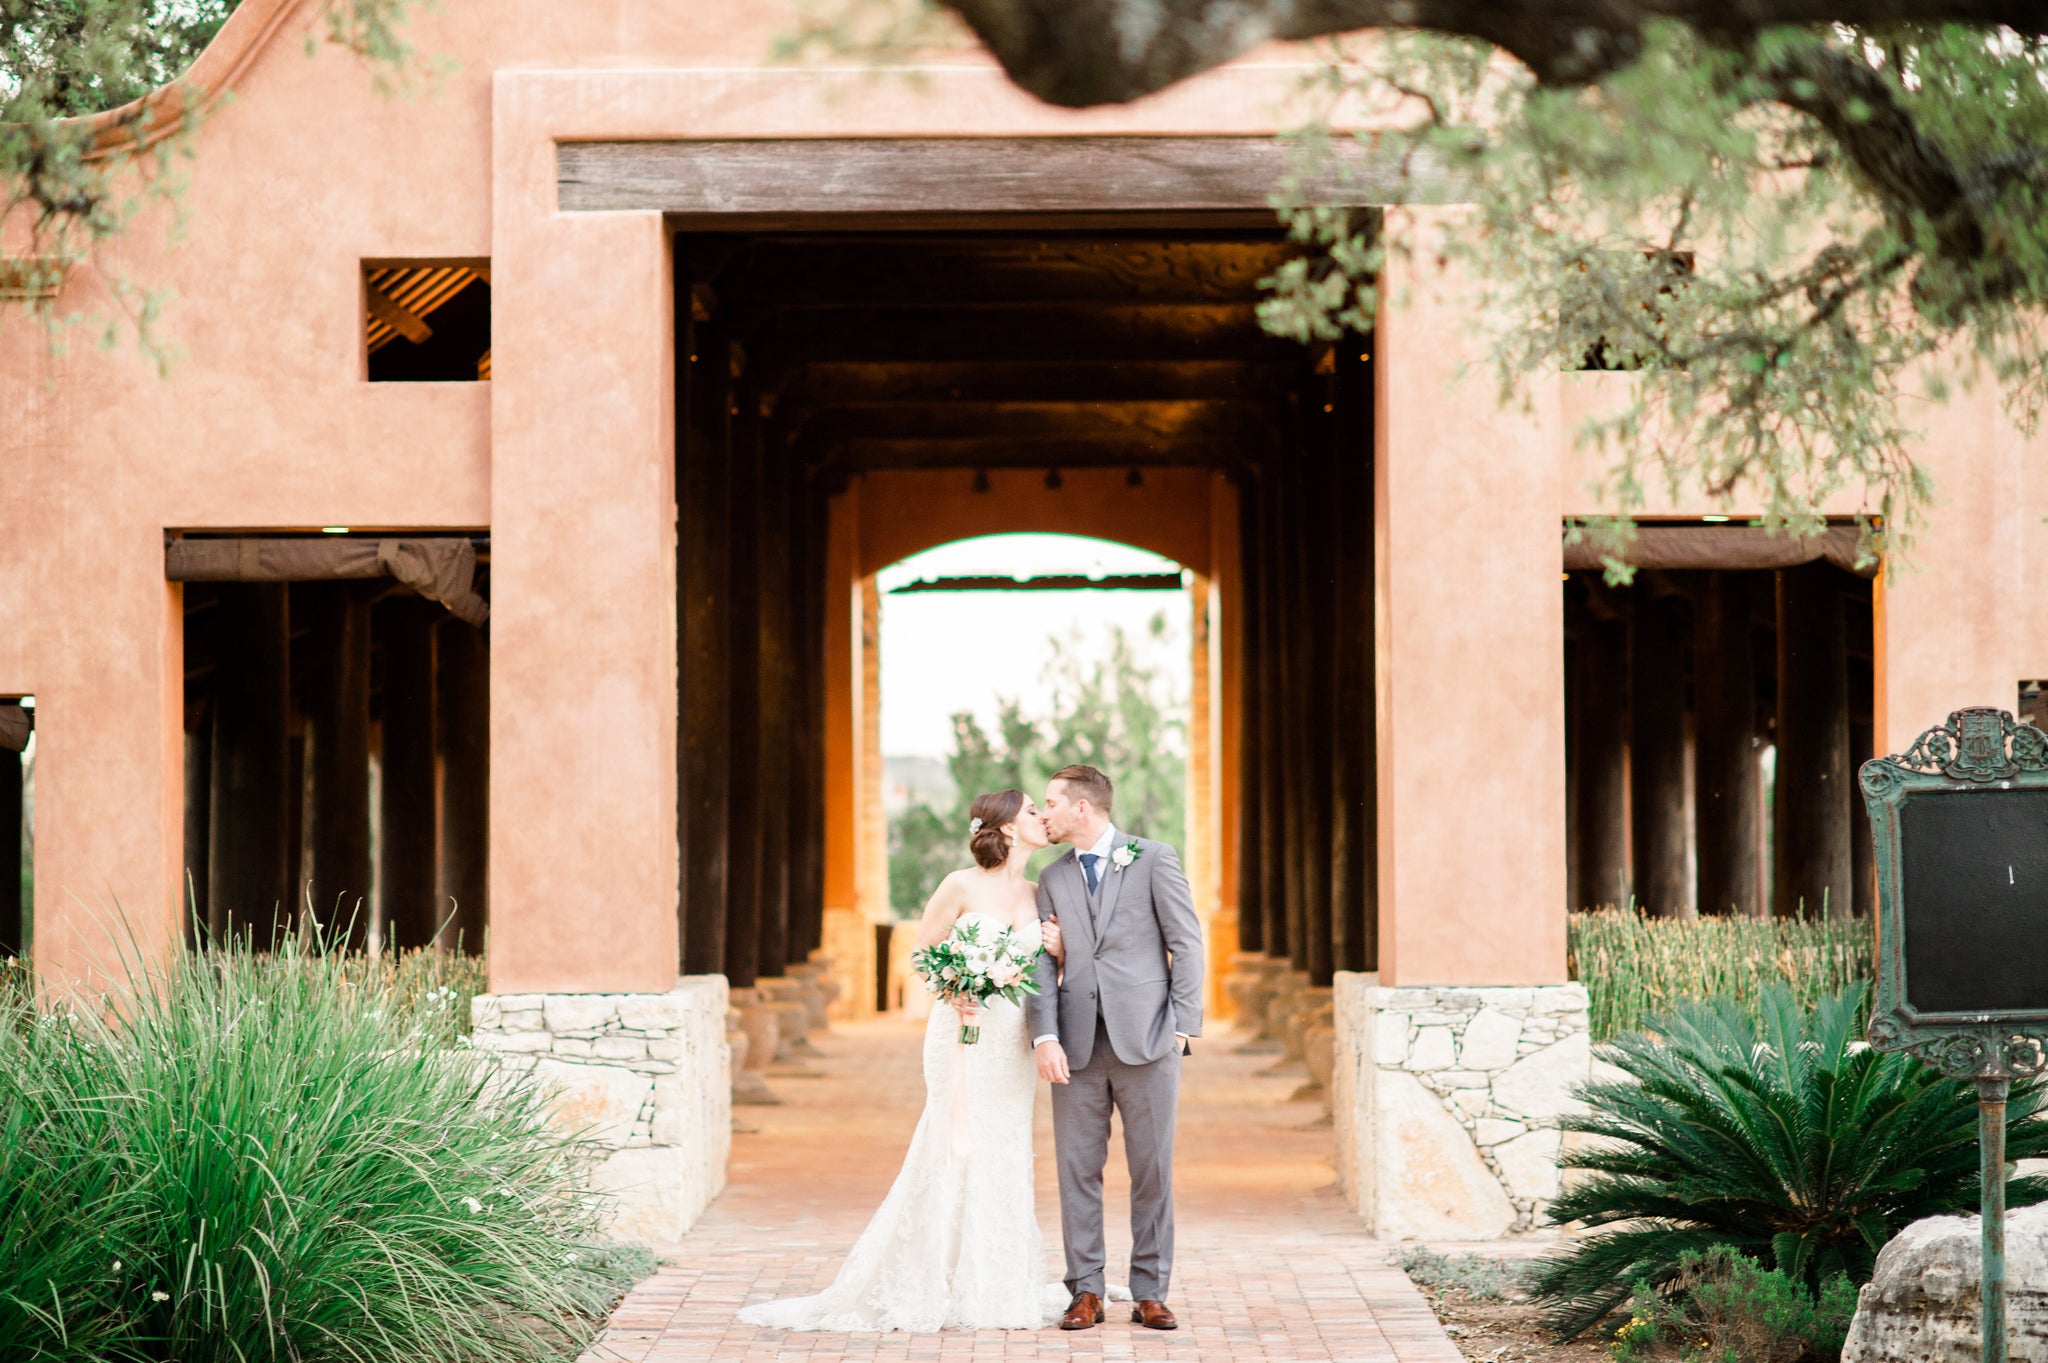 Add a Second Photographer - Lindsey Mueller Photography